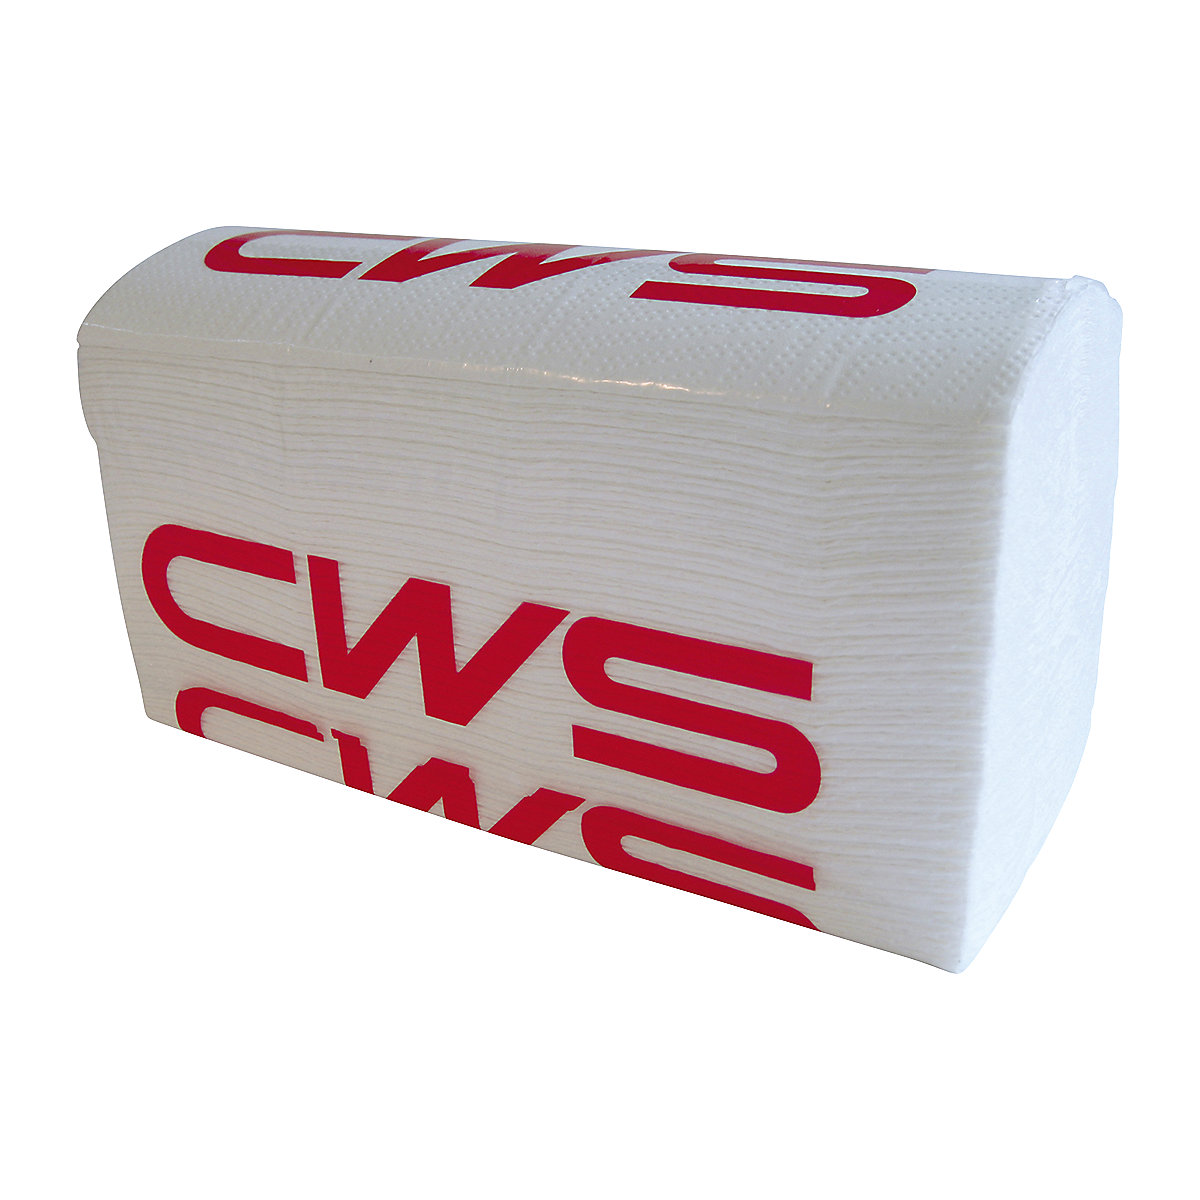 Folded paper towels with M fold - CWS